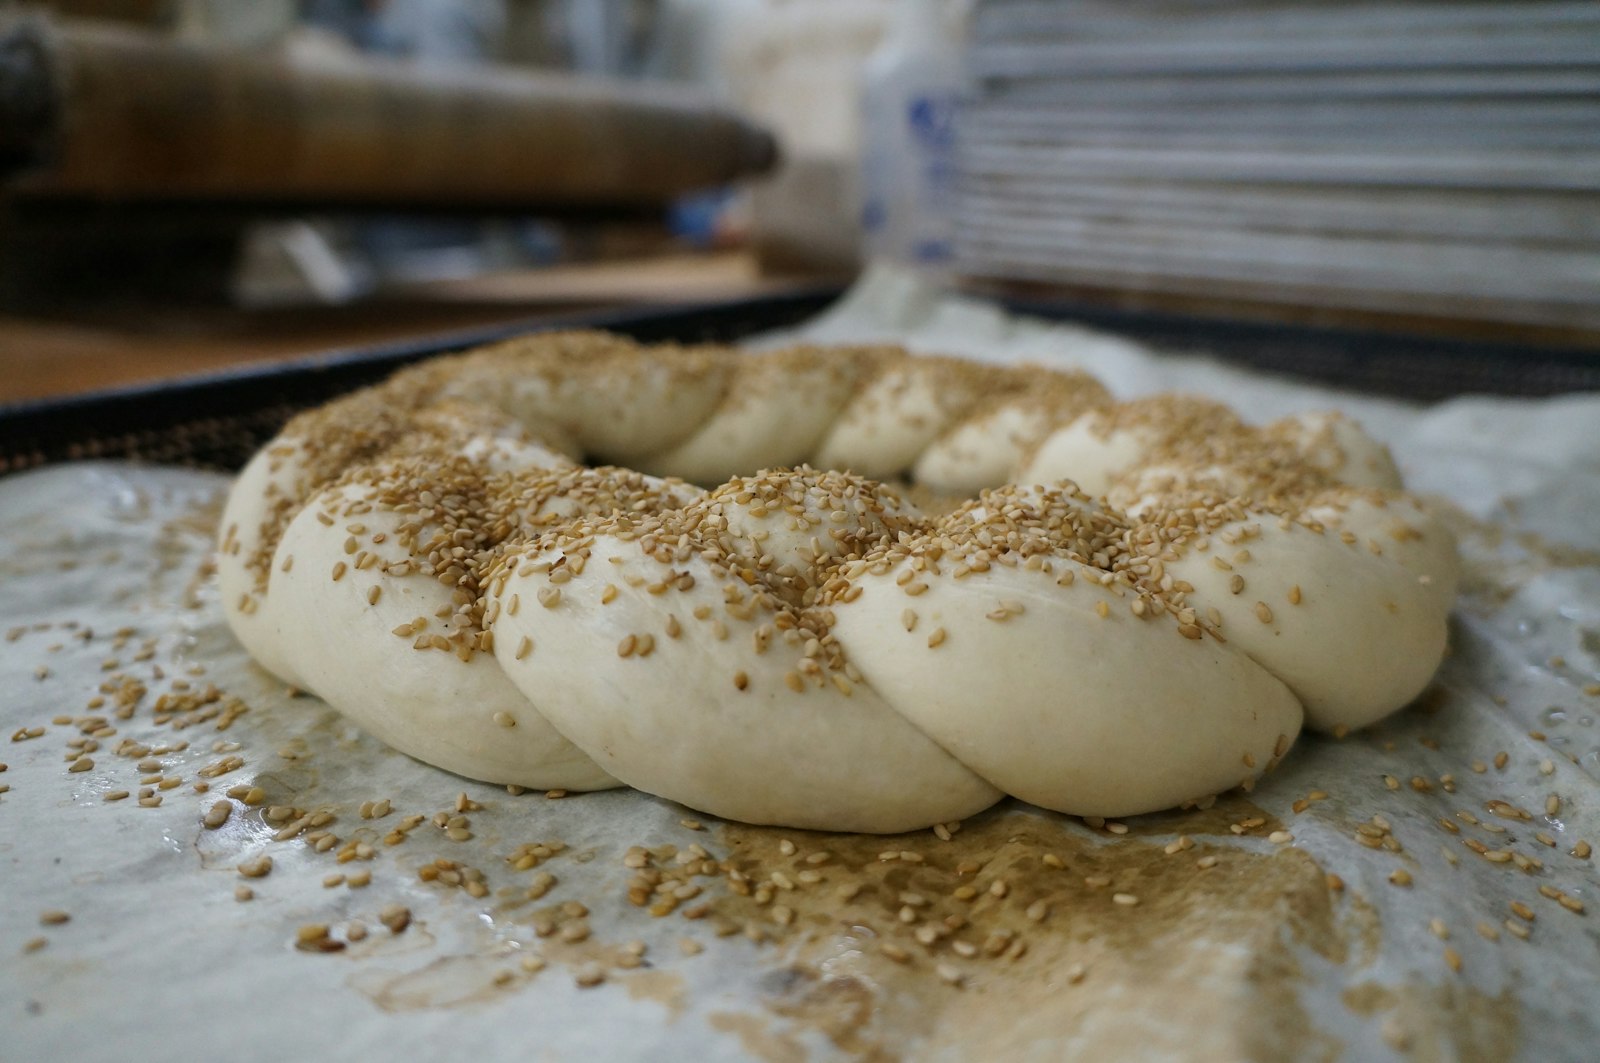 Made from semolina flour, the tradition is for simple round loaves, topped with sesame seeds or a cross indentation, or more complicated hand-braided loaves in shapes usually in the form of crowns, St. Joseph staffs, or crosses.